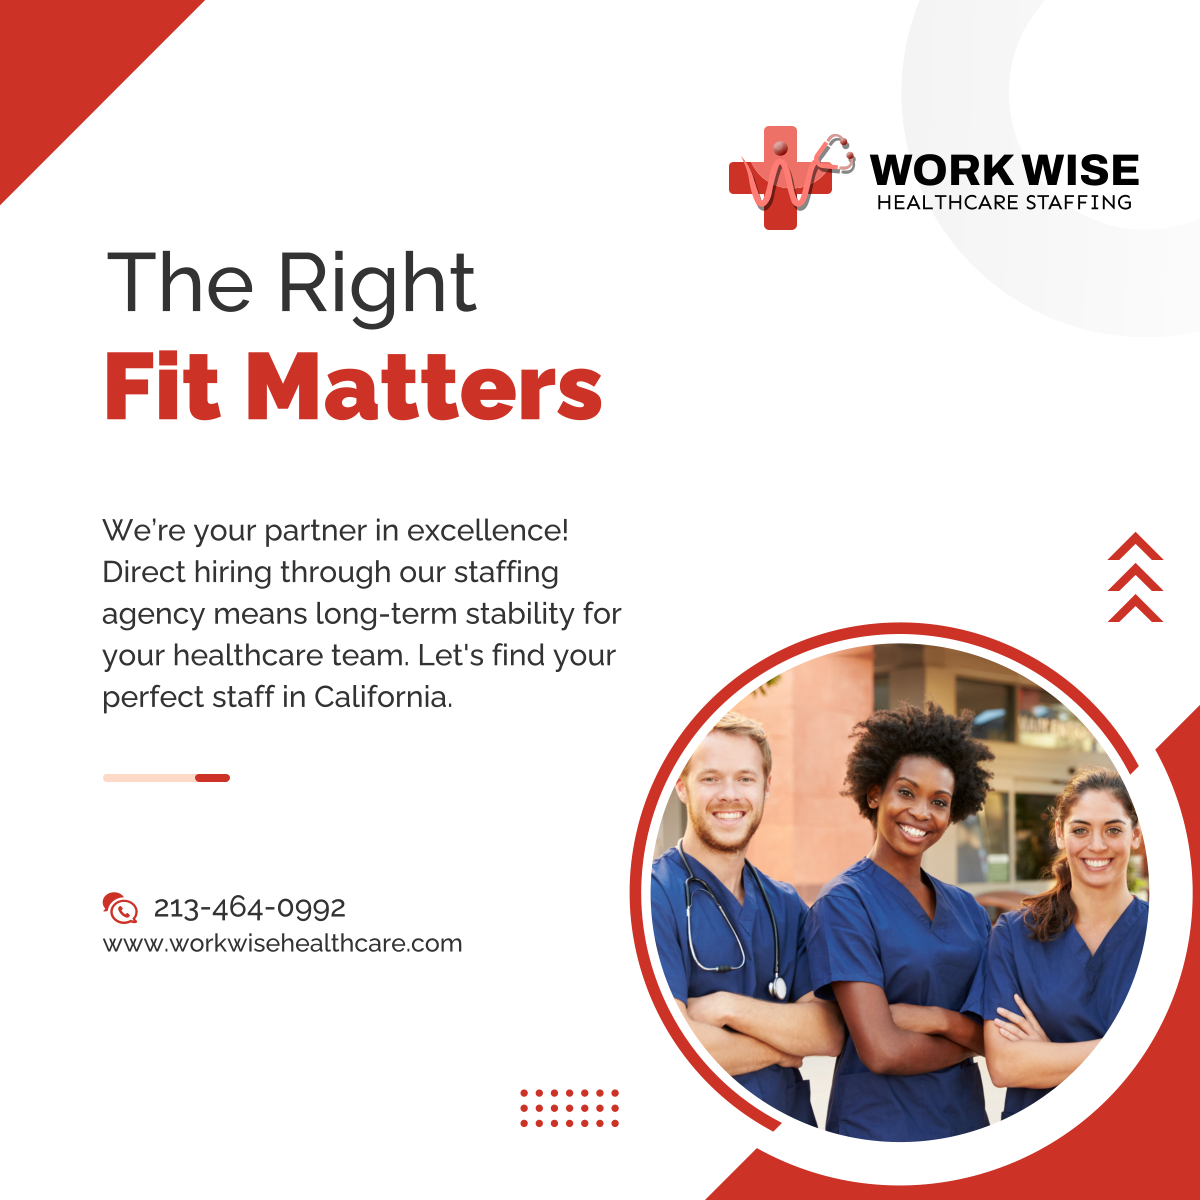 Work Wise Staffing and Consulting is dedicated to solving staffing crises in Los Angeles. From RNs to CNAs, we've got you covered. Let's ensure your patients always have access to quality care. 

#LosAngelesCalifornia #MedicalStaffing #HealthcareTeam